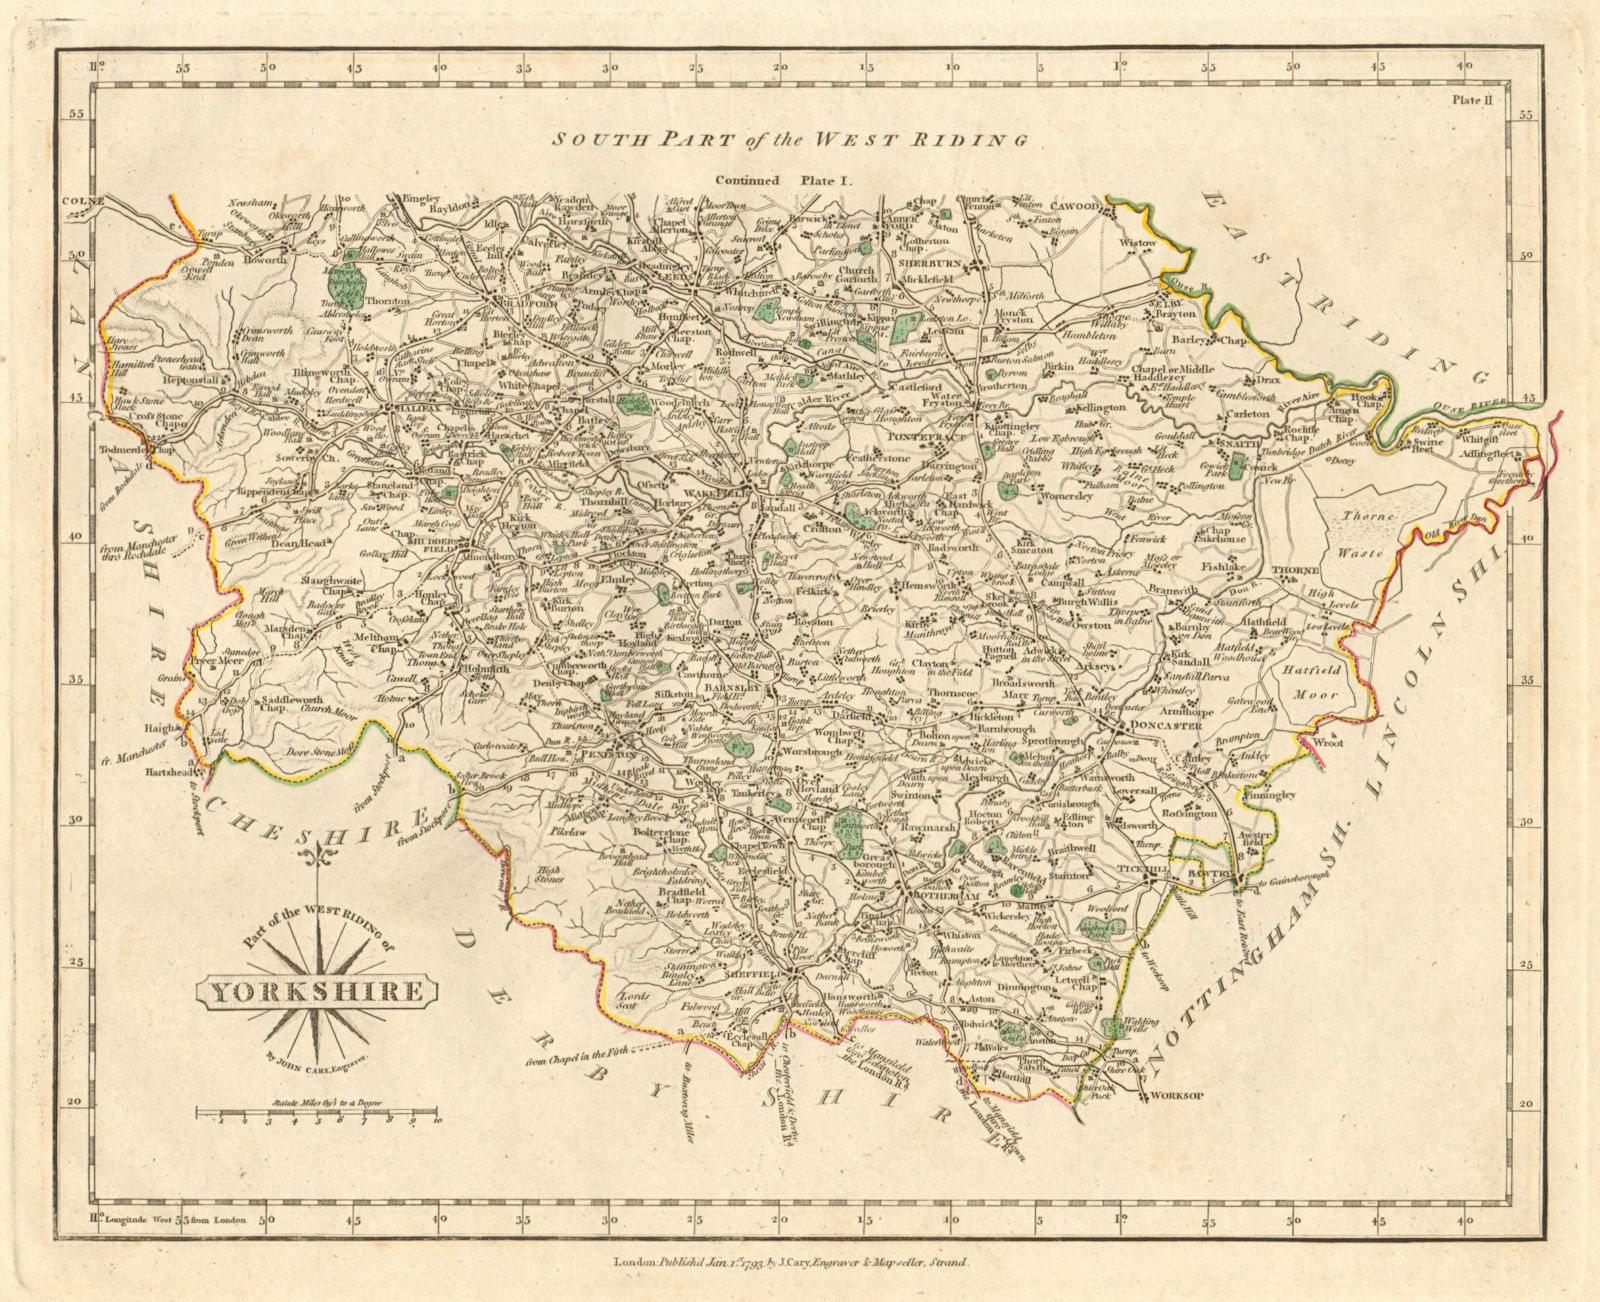 WEST RIDING OF YORKSHIRE-NORTH antique map by JOHN CARY. Original colour 1793